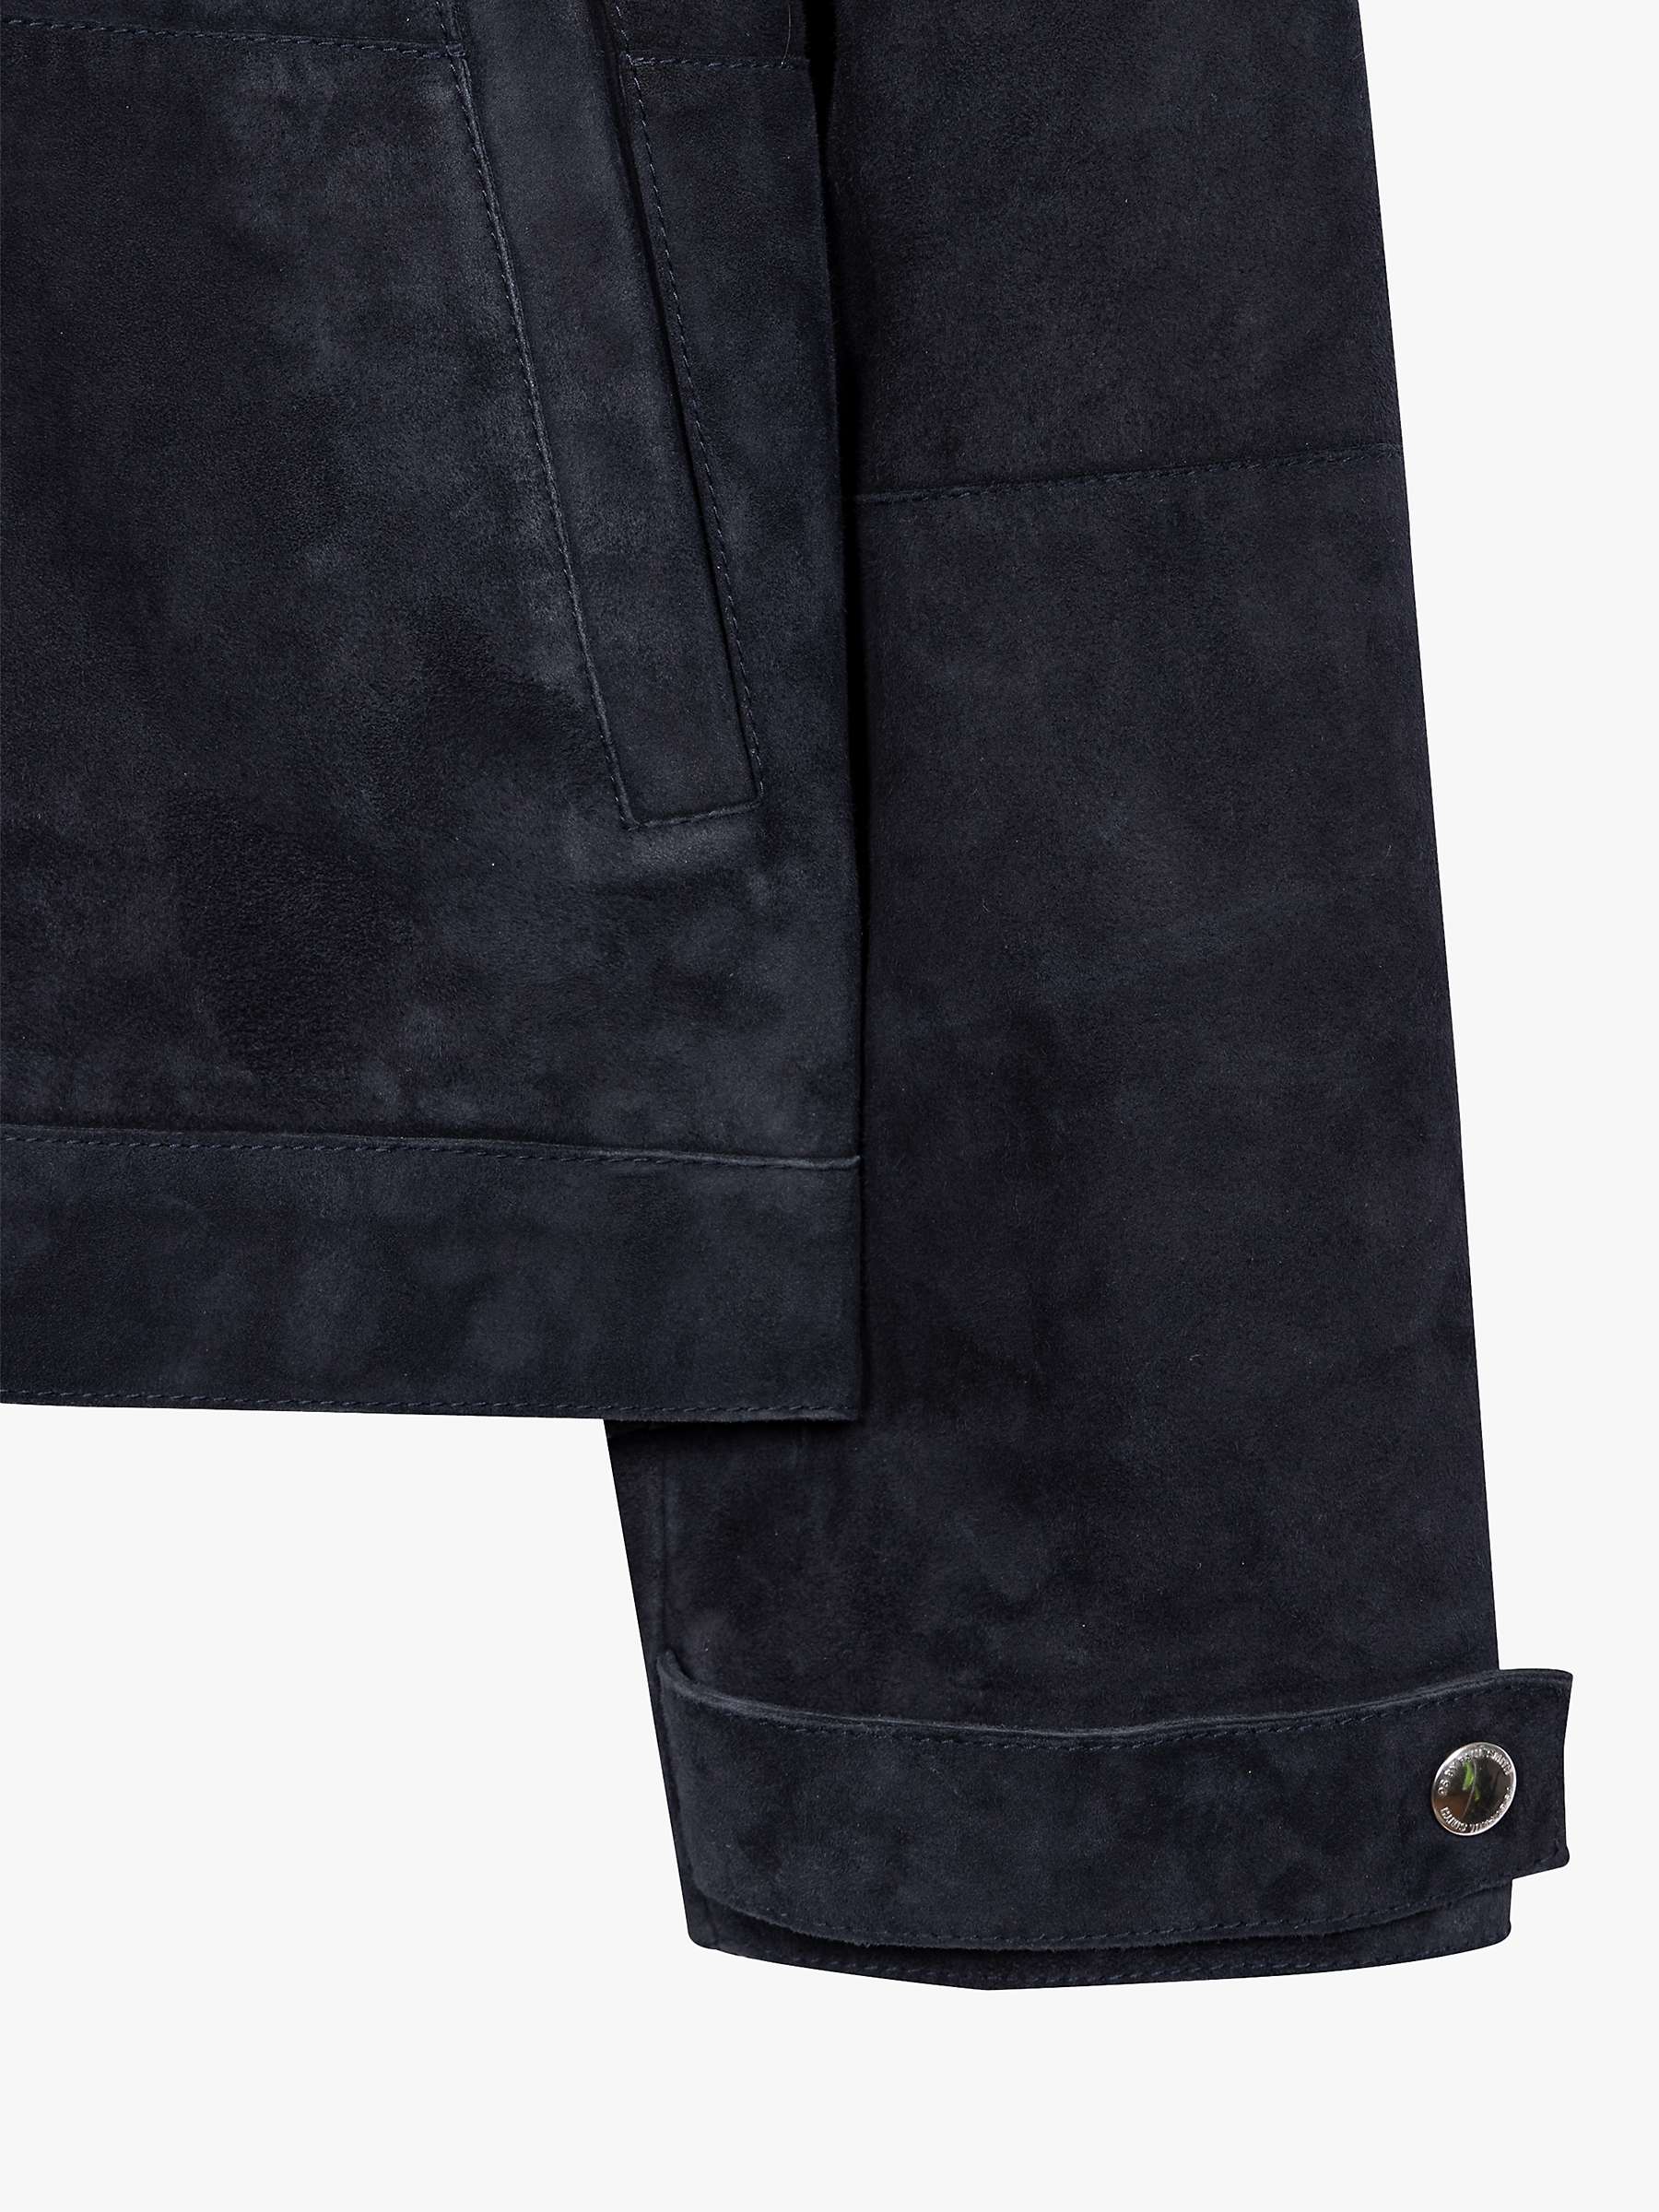 Buy Paul Smith Suede Jacket, Navy Online at johnlewis.com